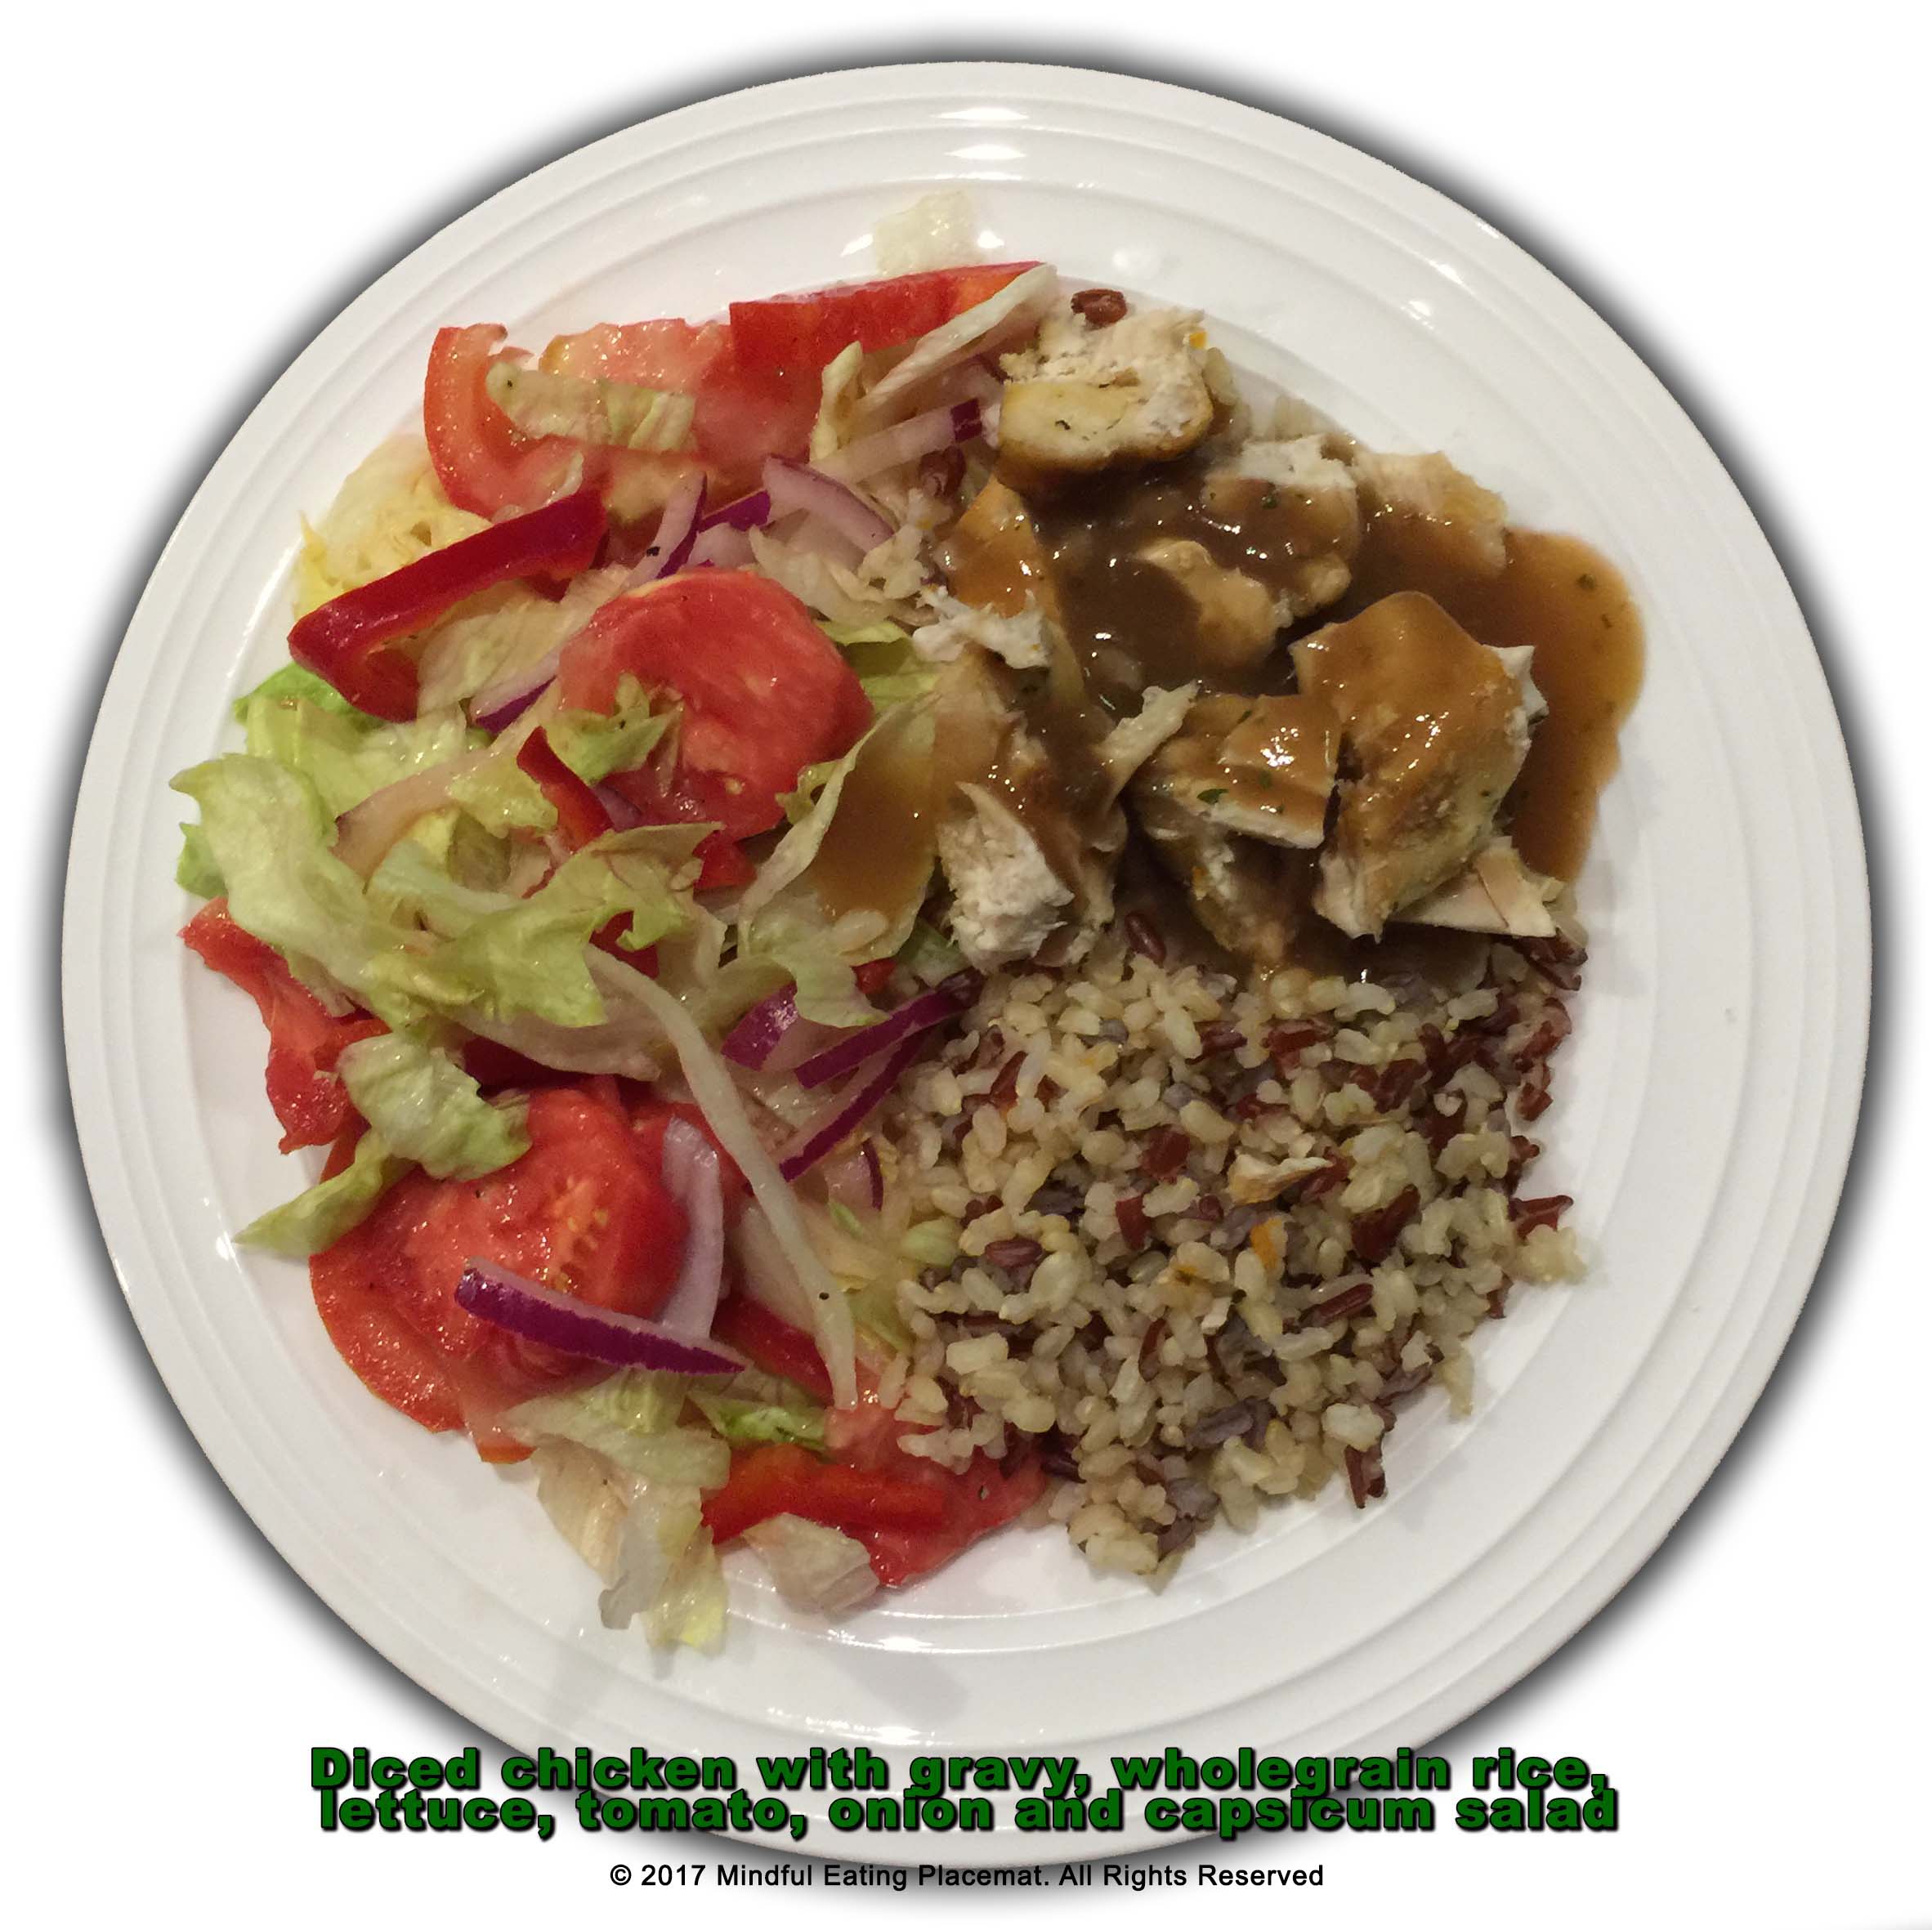 Diced chicken with gravy and wholegrain rice with a lettuce and tomato salad